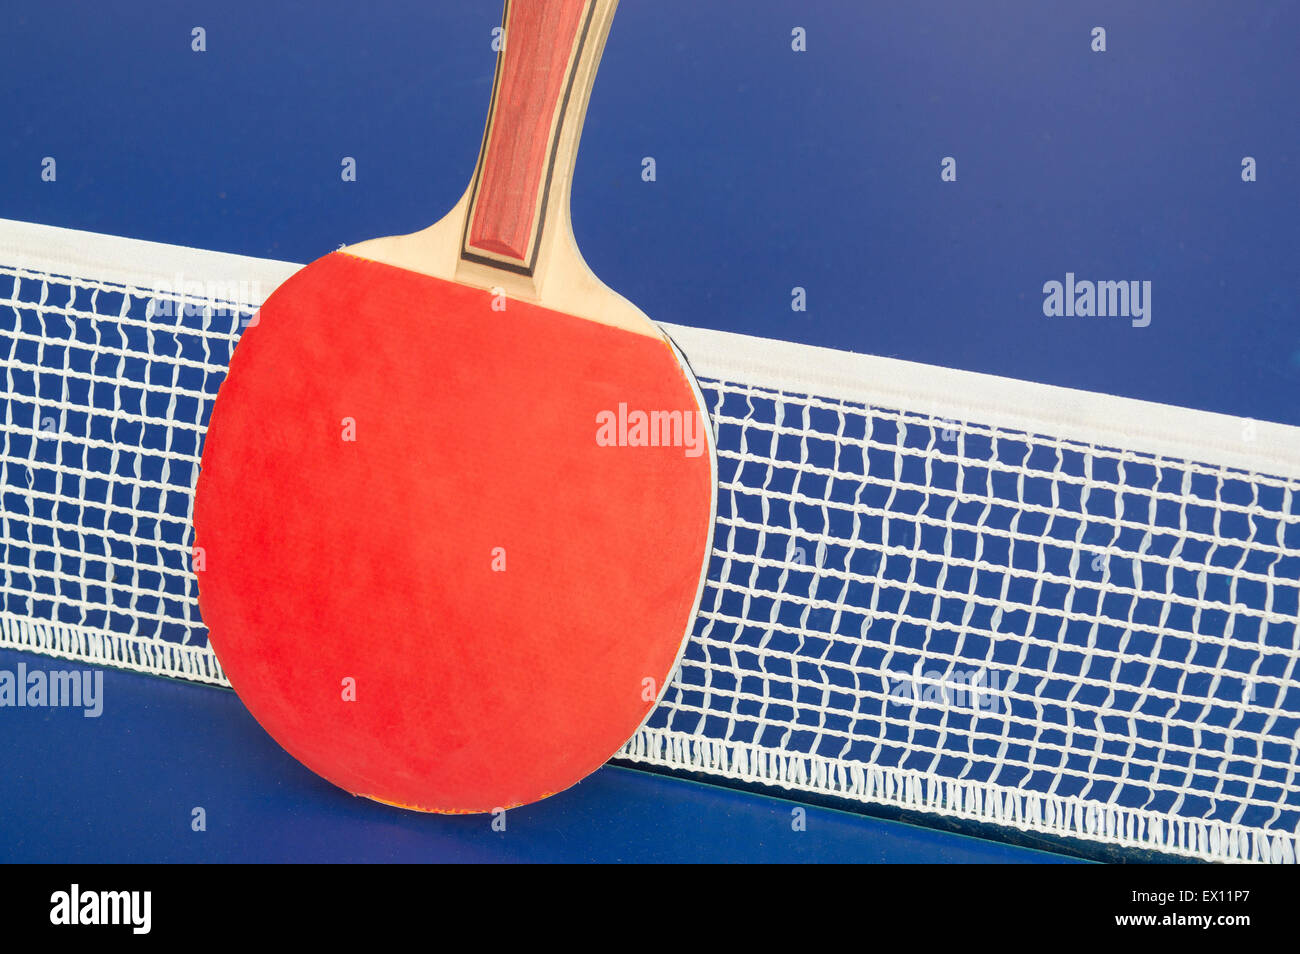 Table tennis paddle and net on a table Stock Photo